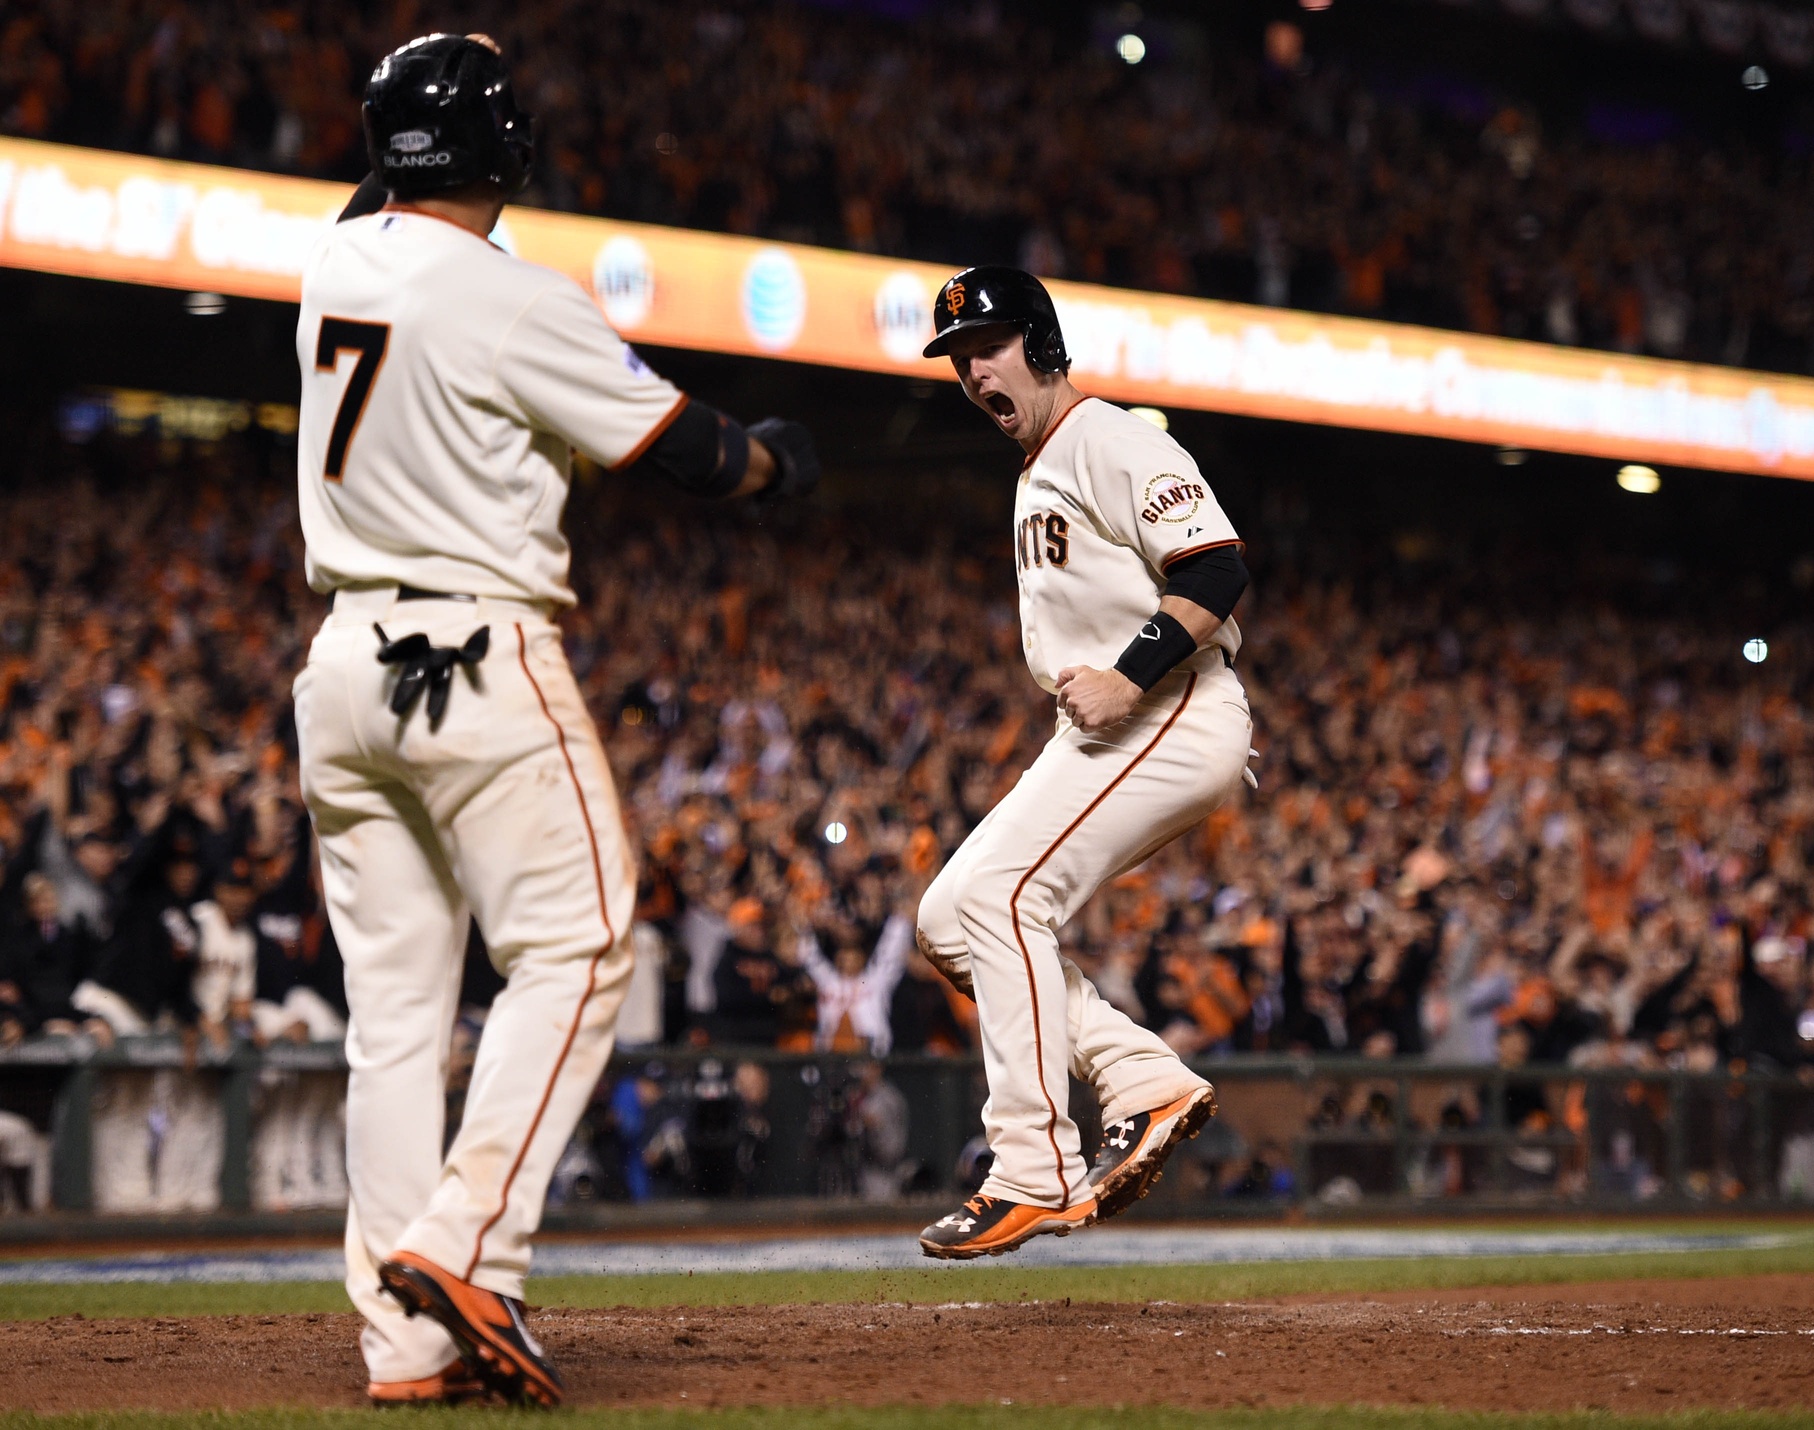 Royals vs. Giants, 2014 World Series Game 4 results: 4 things we learned  from Giants' 11-4 win 